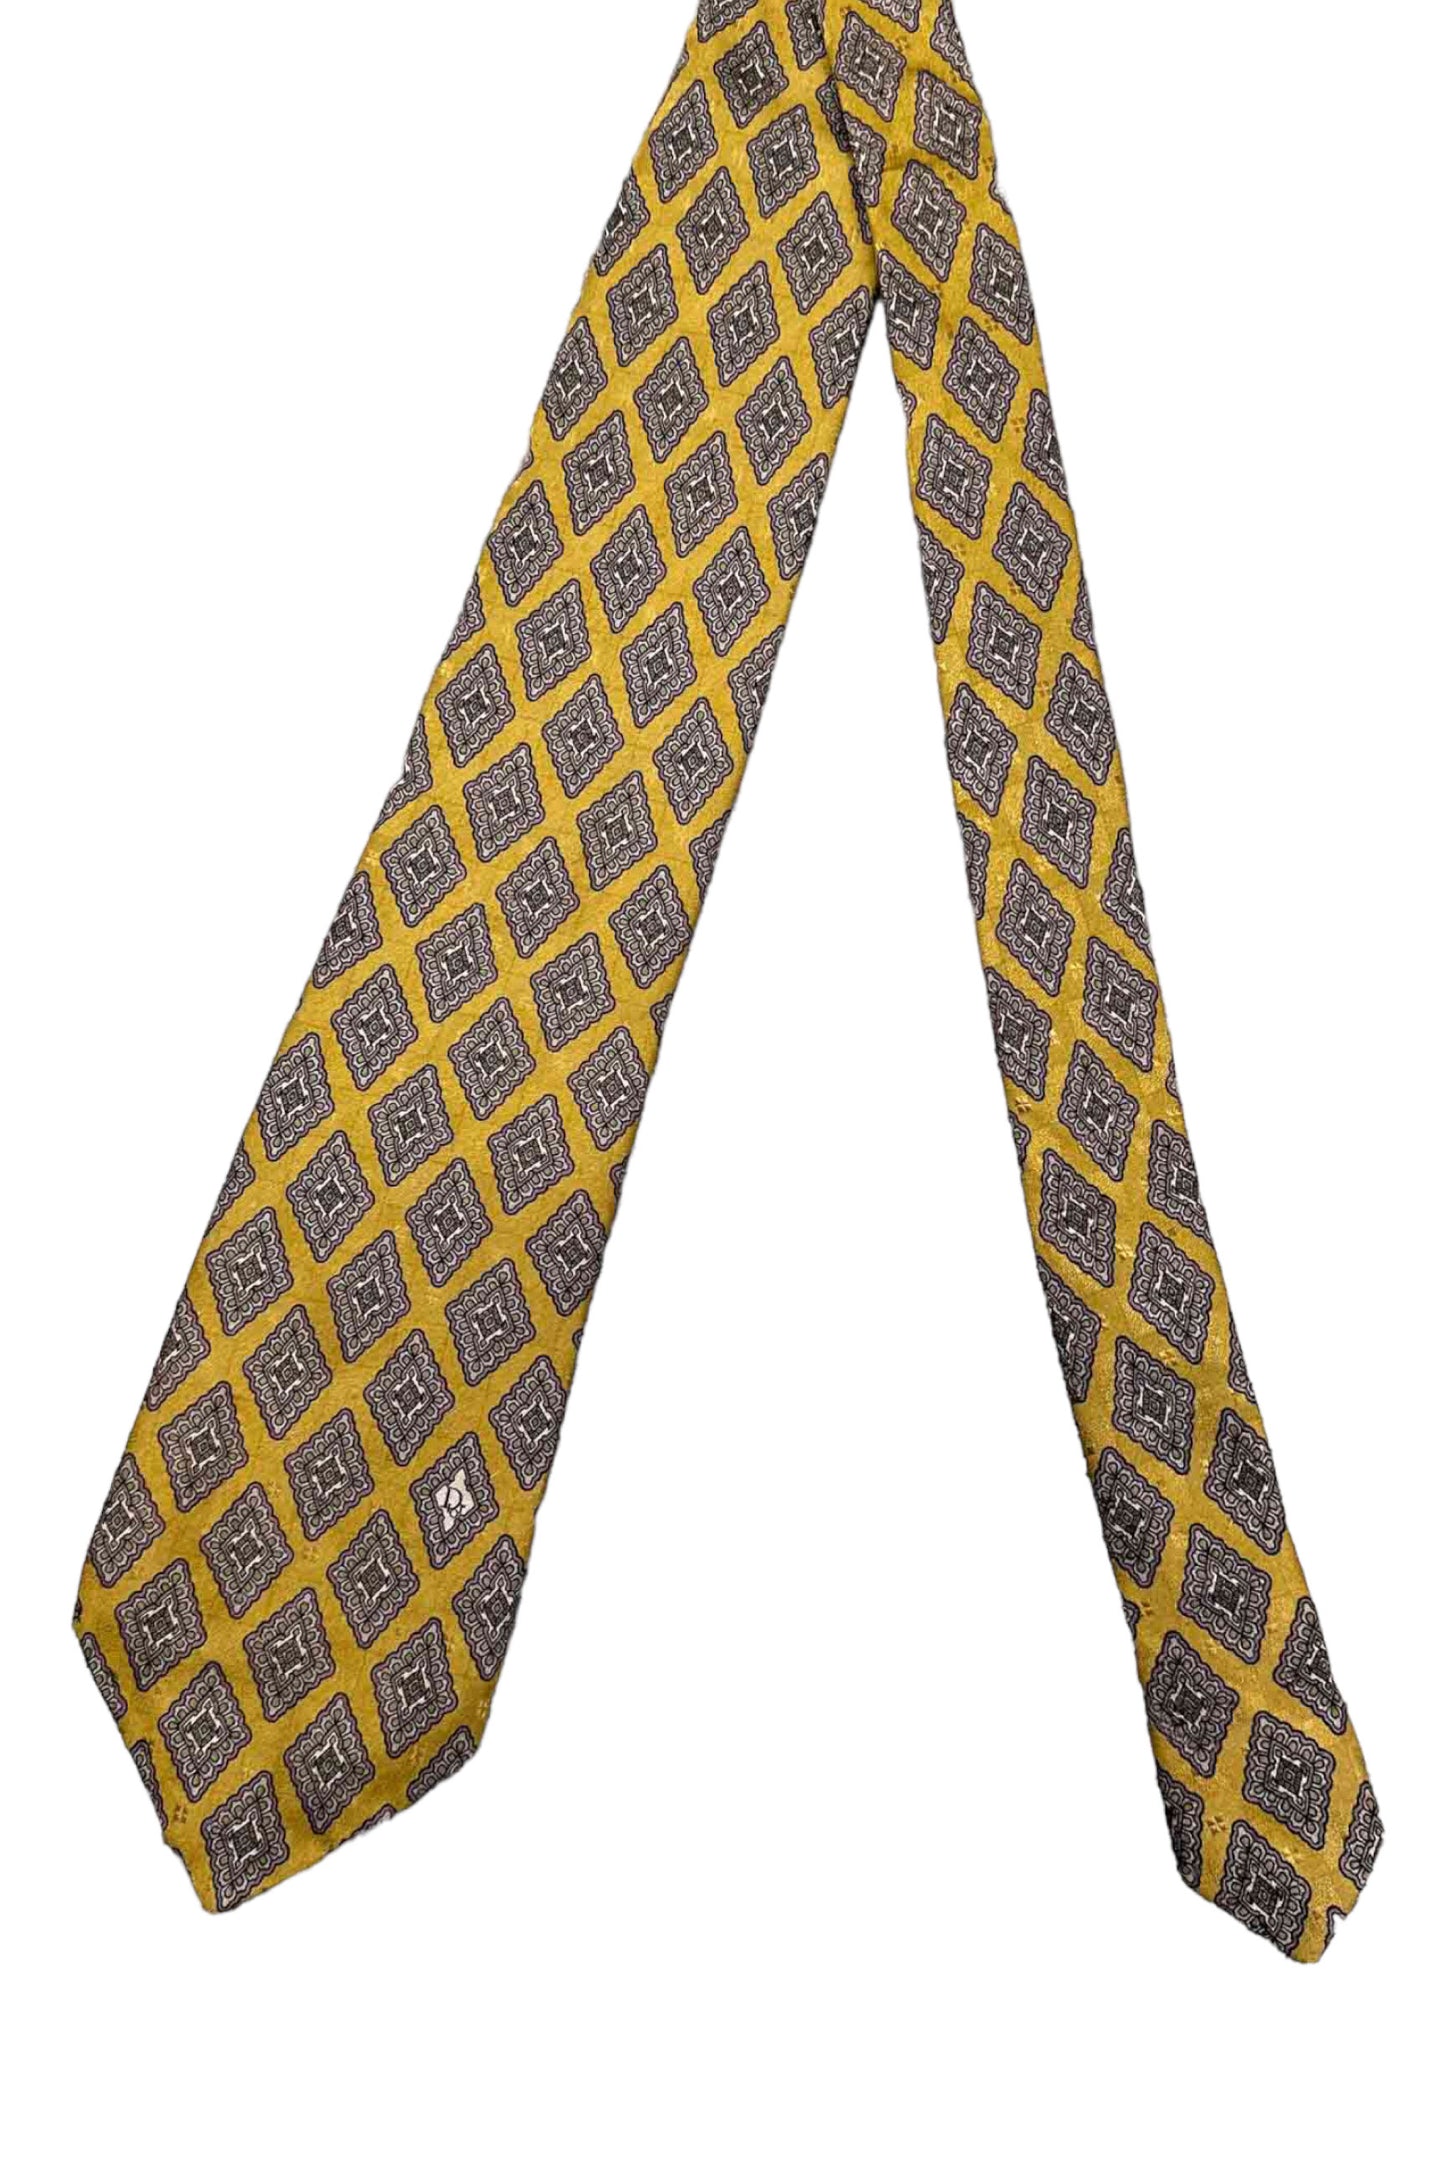 Made in FRANCE Christian Dior tie